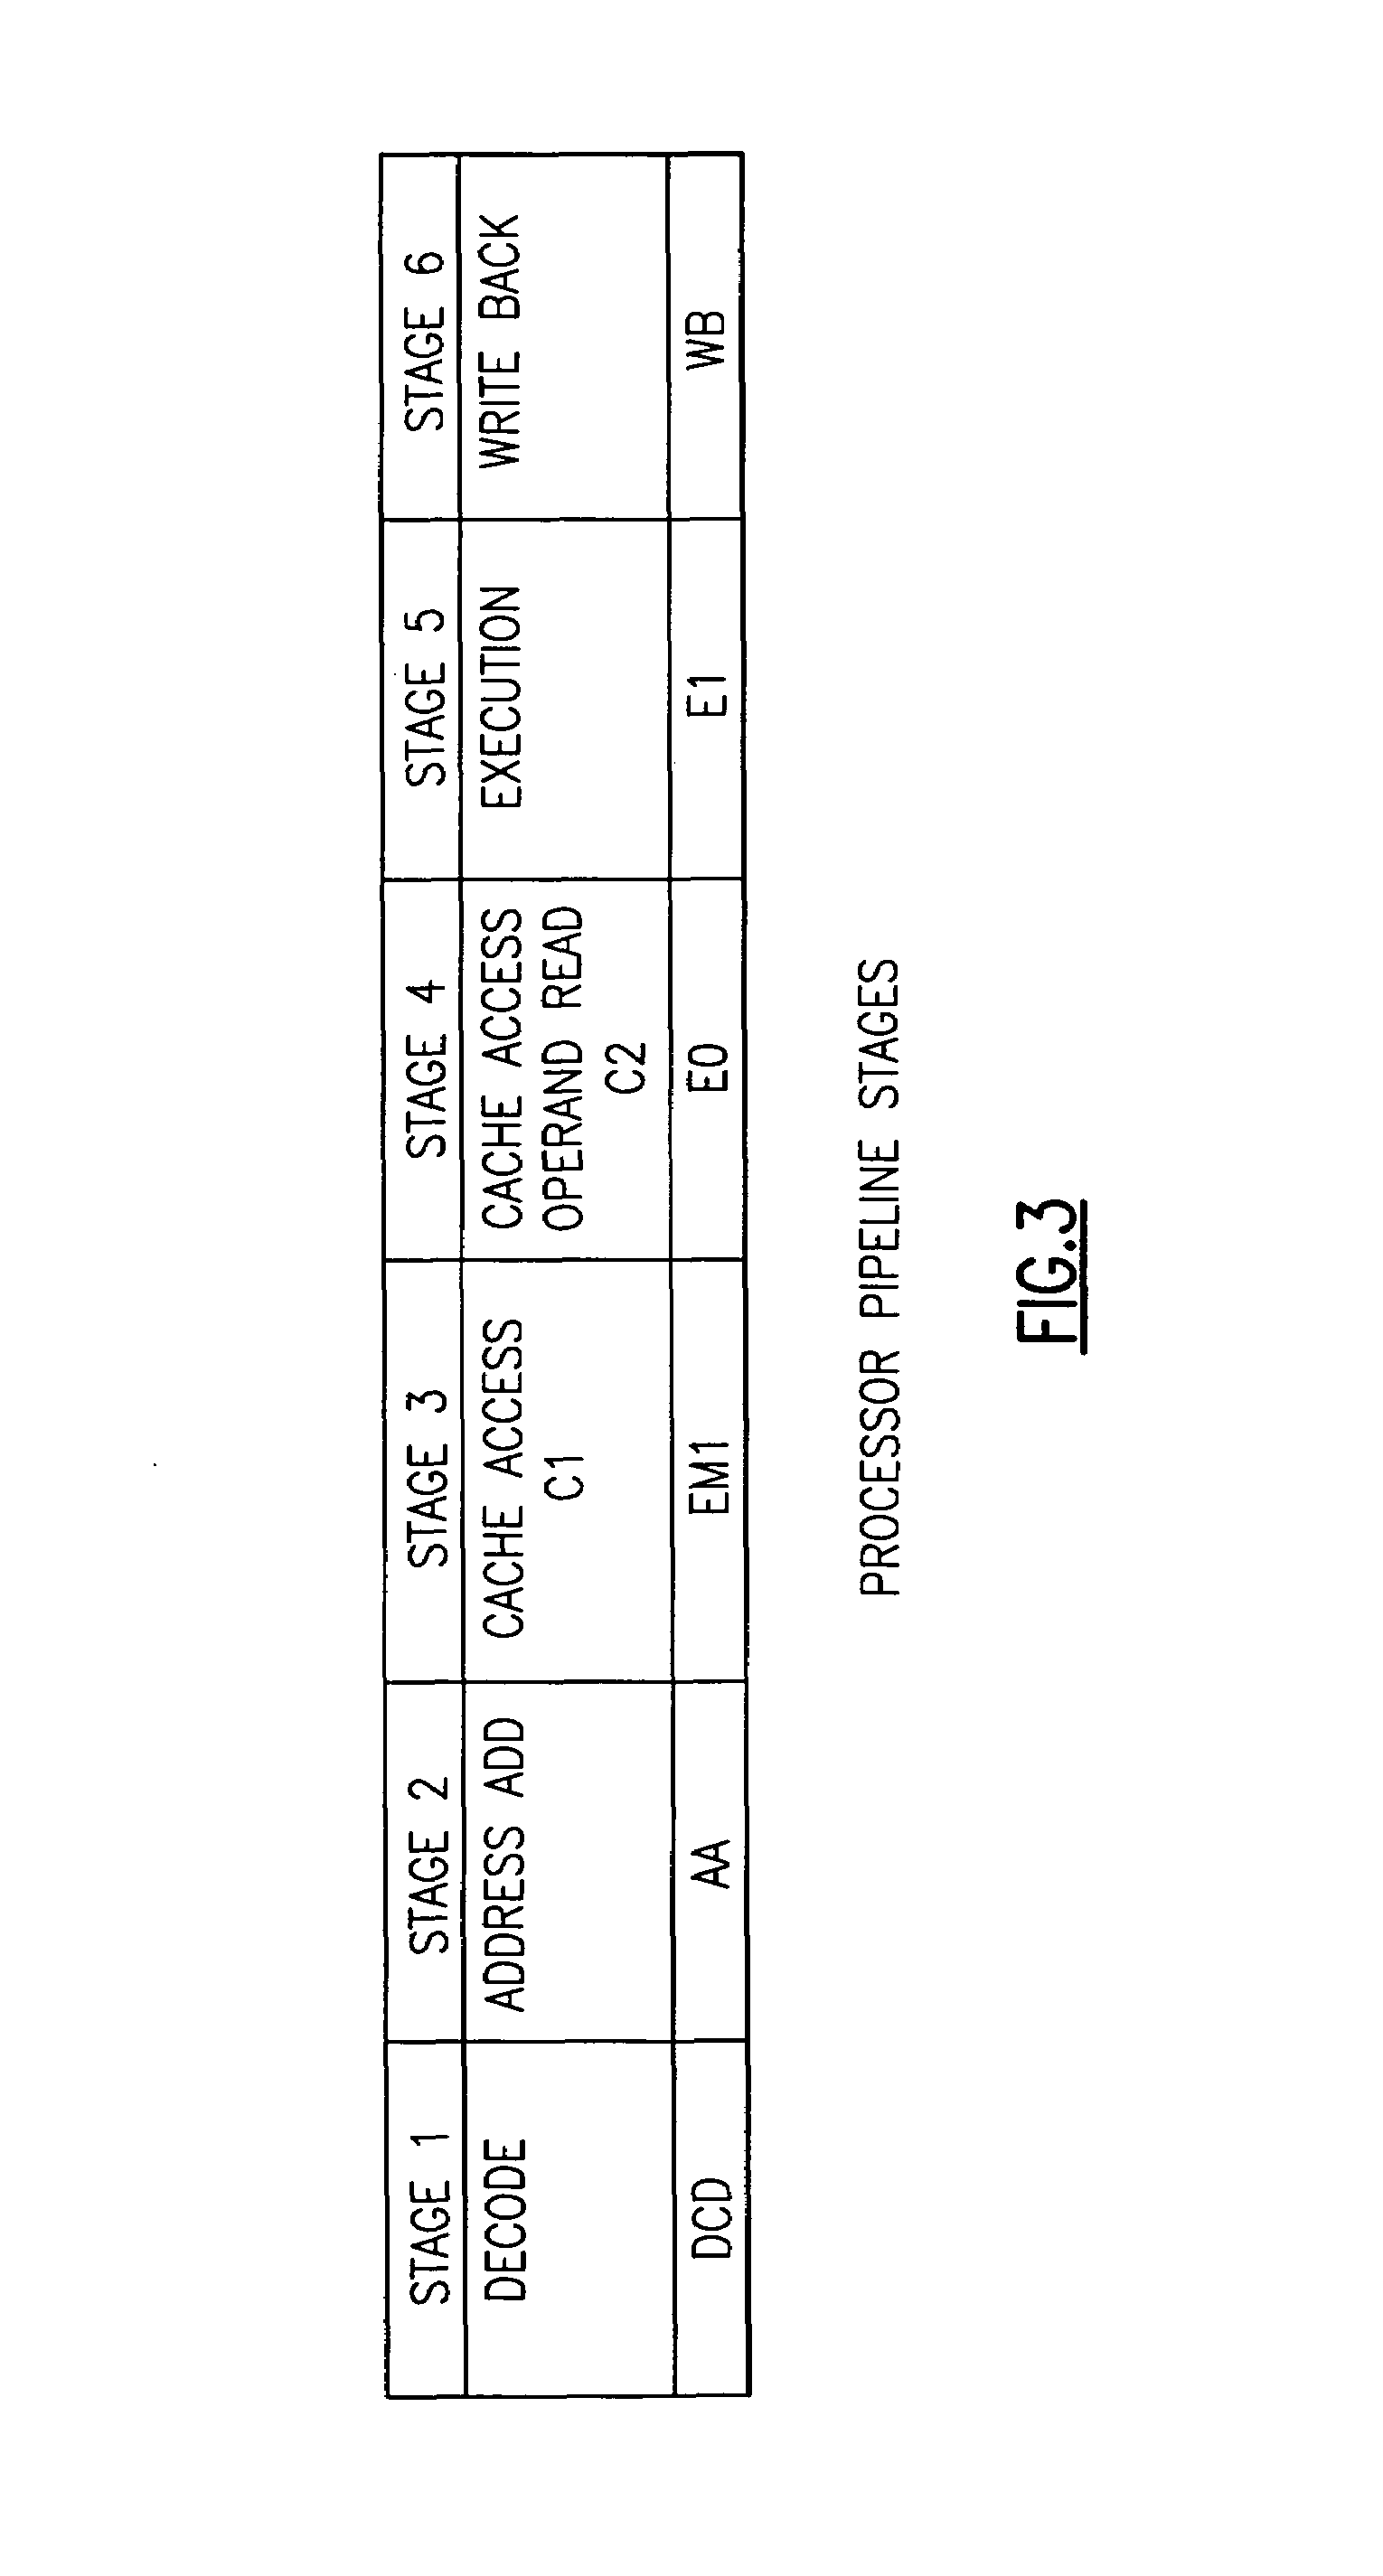 Multi-pipe dispatch and execution of complex instructions in a superscalar processor